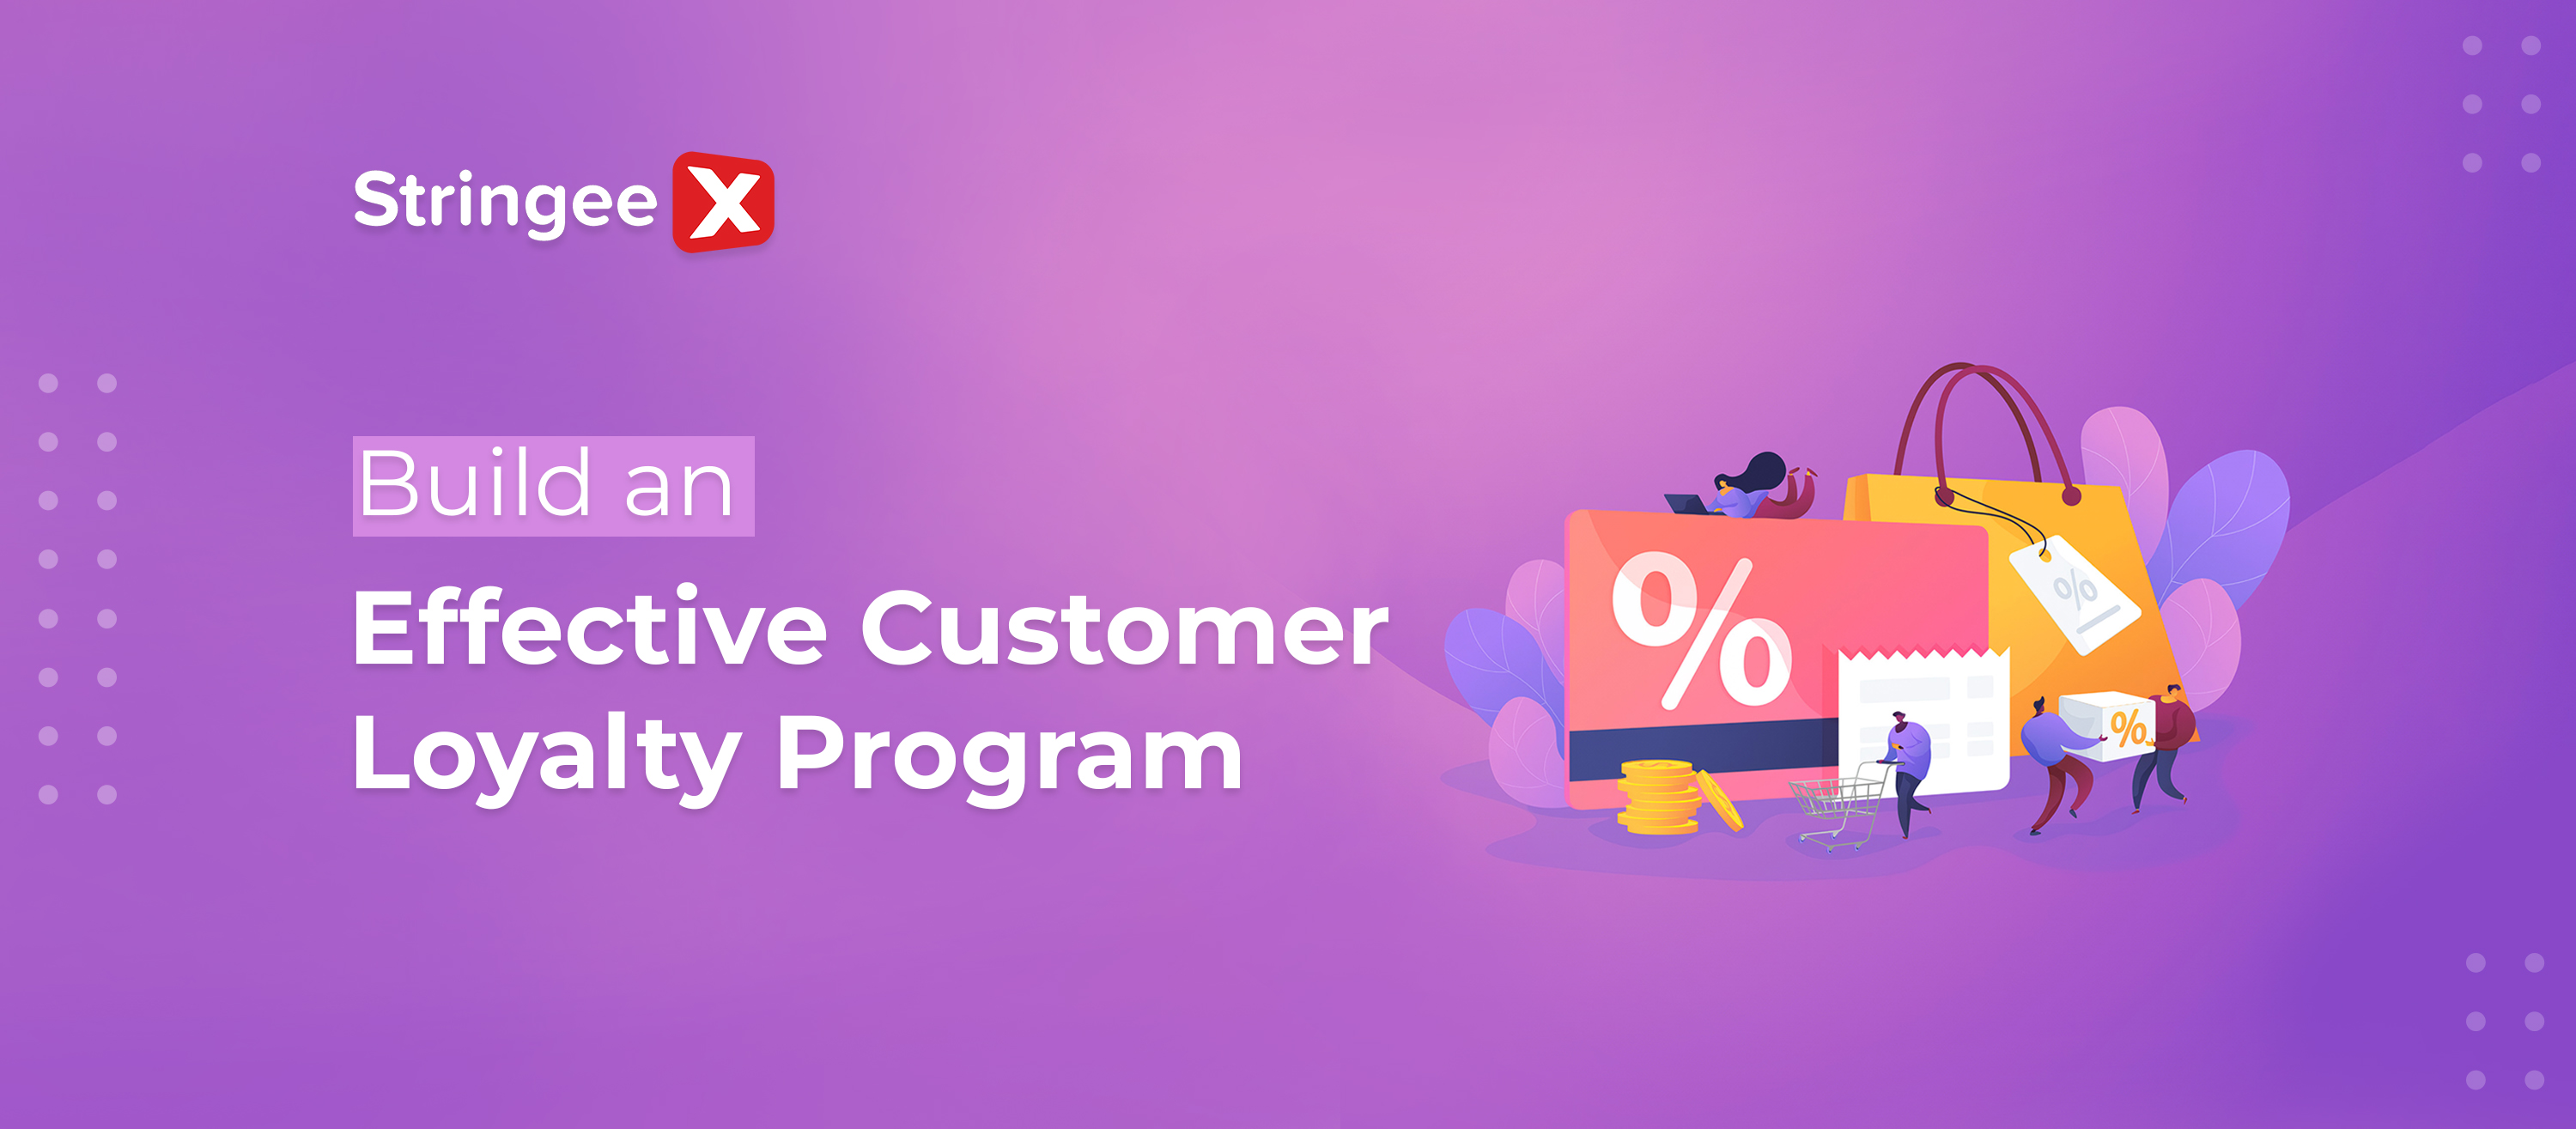 Instructions for building an effective customer loyalty program